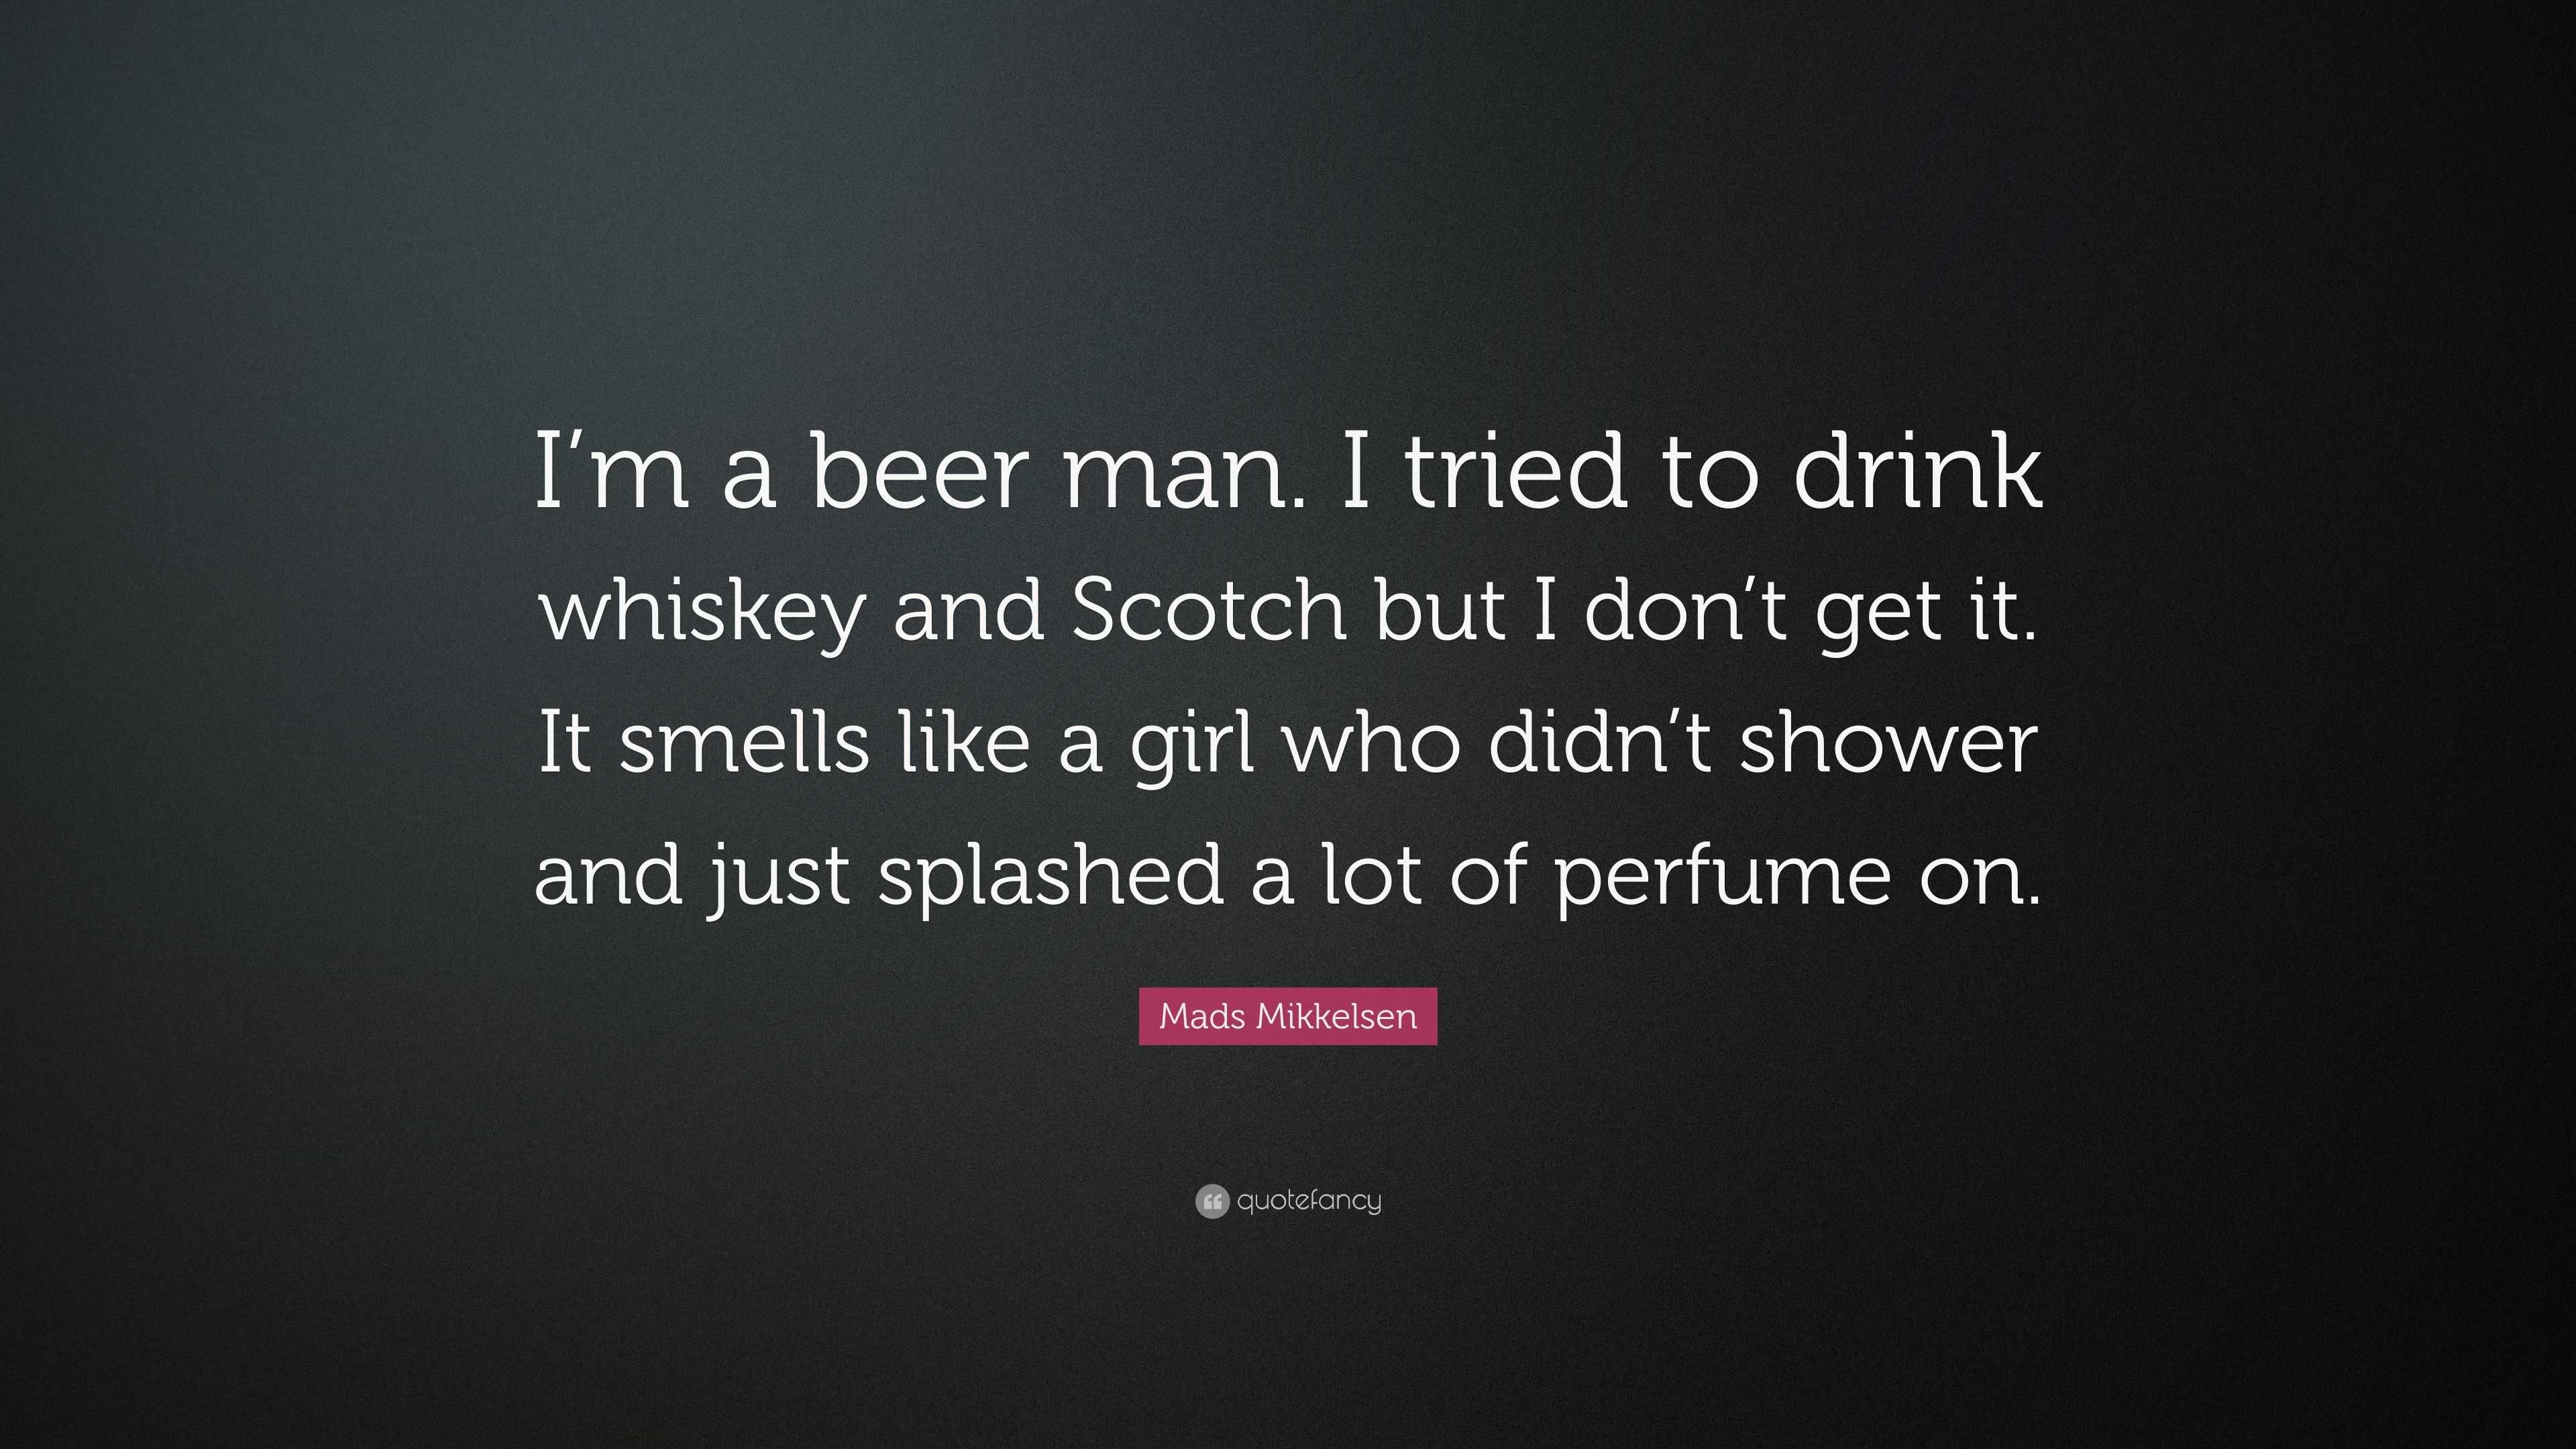 Mads Mikkelsen Quote: “I’m a beer man. I tried to drink whiskey and ...